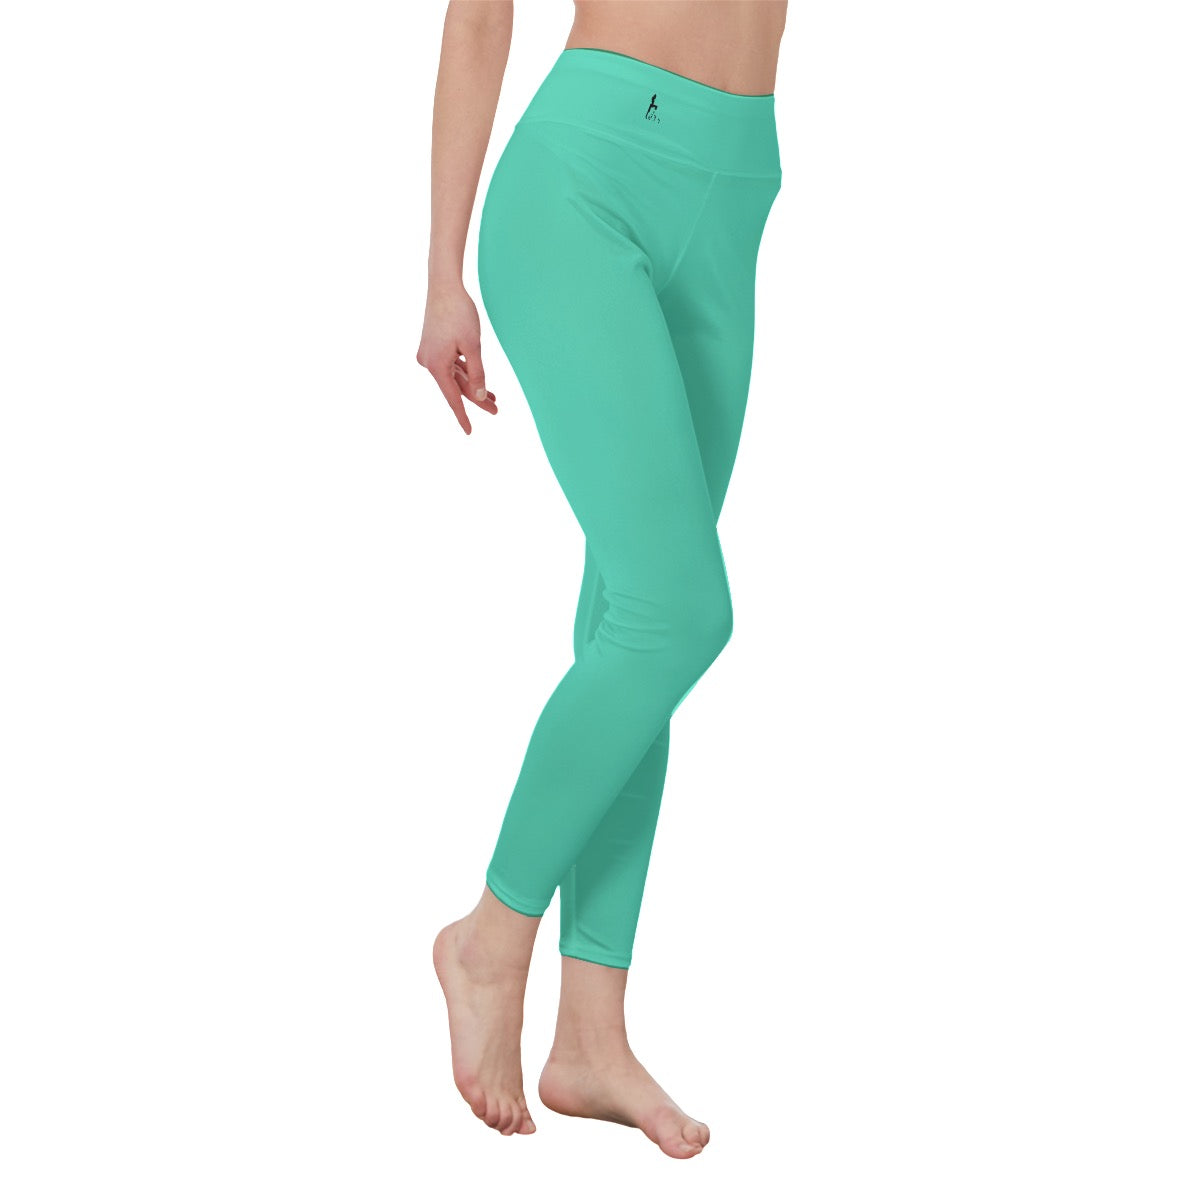 Oficialmente Sexy Turquoise Green Women's High Waist Leggings With Black Logos & Side Stitch Closure